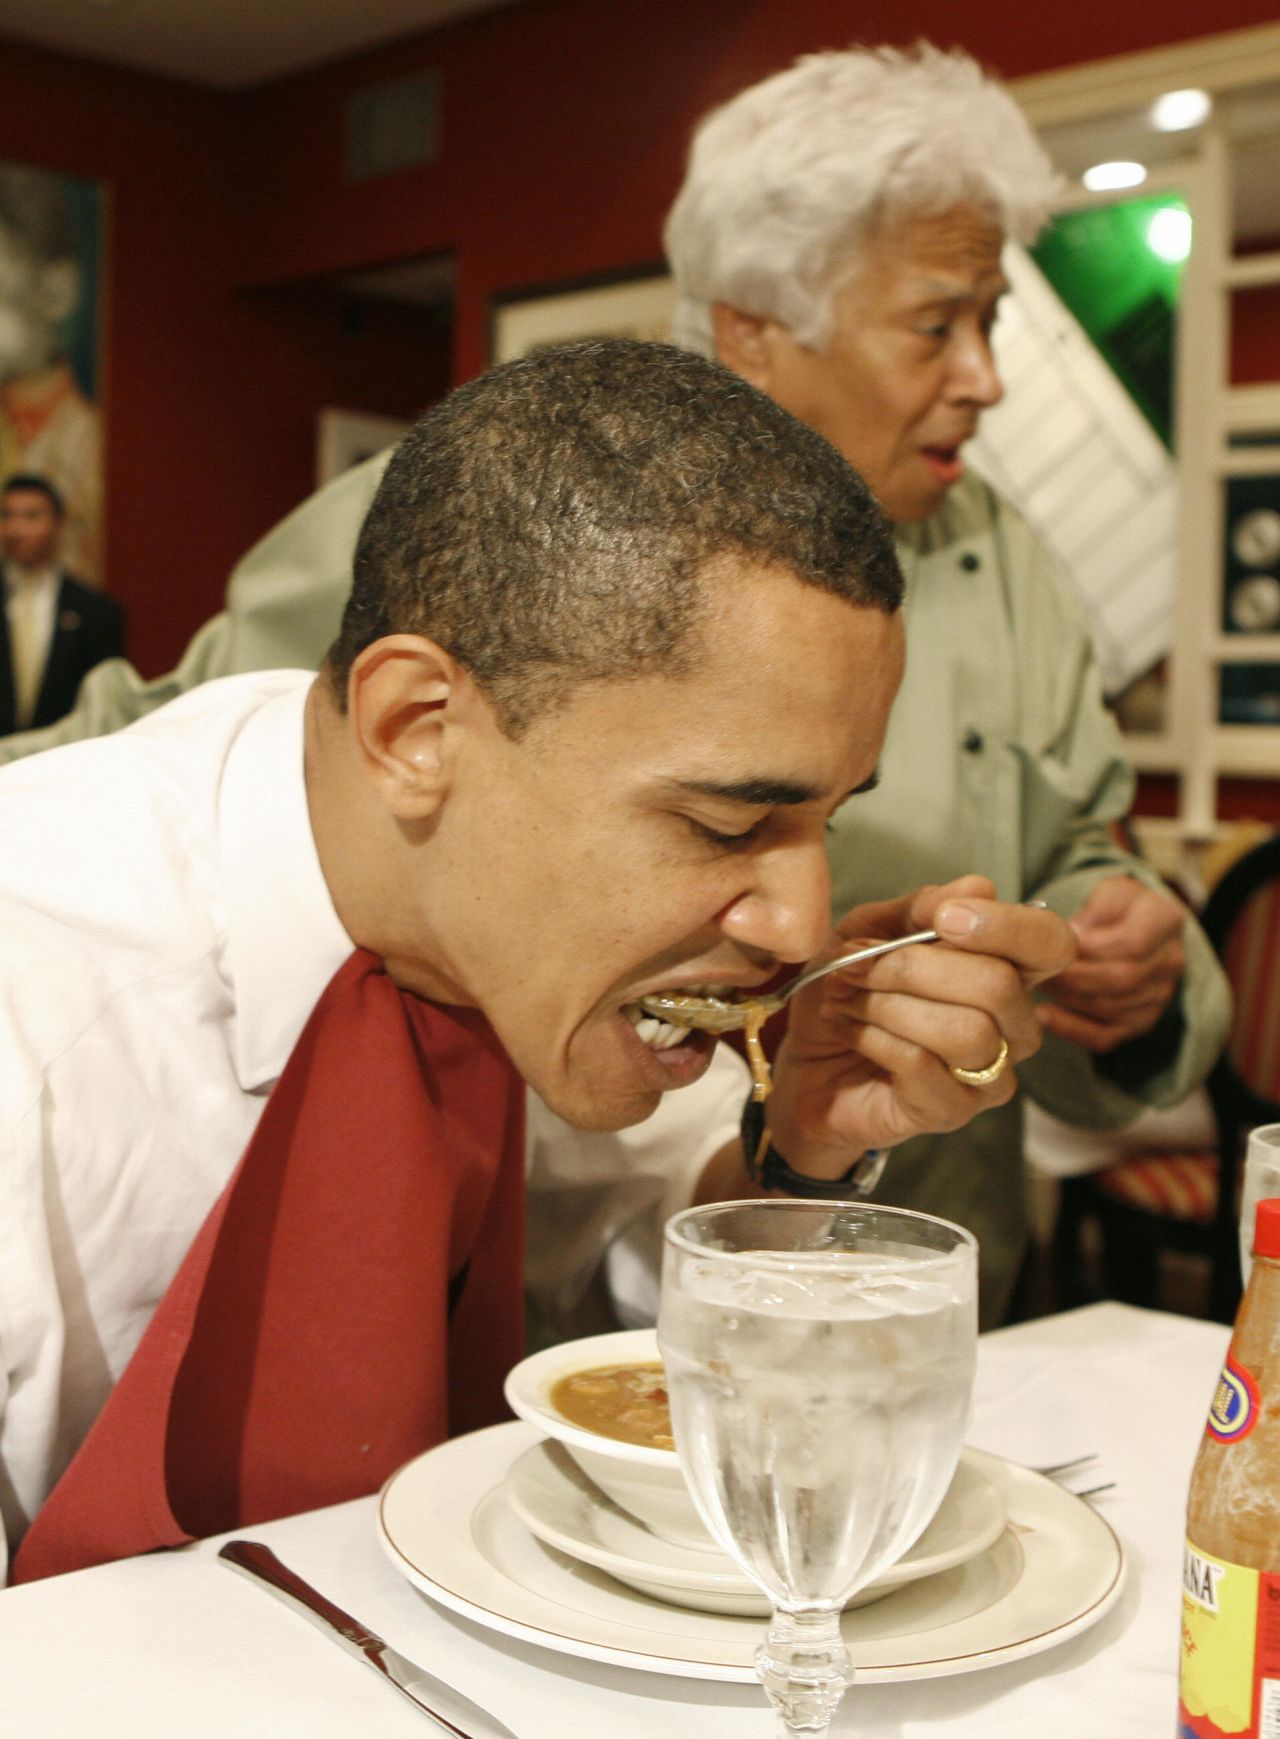 As a presidential candidate Barack Obama ate gumbo -- authentically without tomatoes -- at Dooky Chase's Restaurant in New Orleans in 2008. Gumbo is a cross-cultural dish, though debate swirls around its proper preparation.